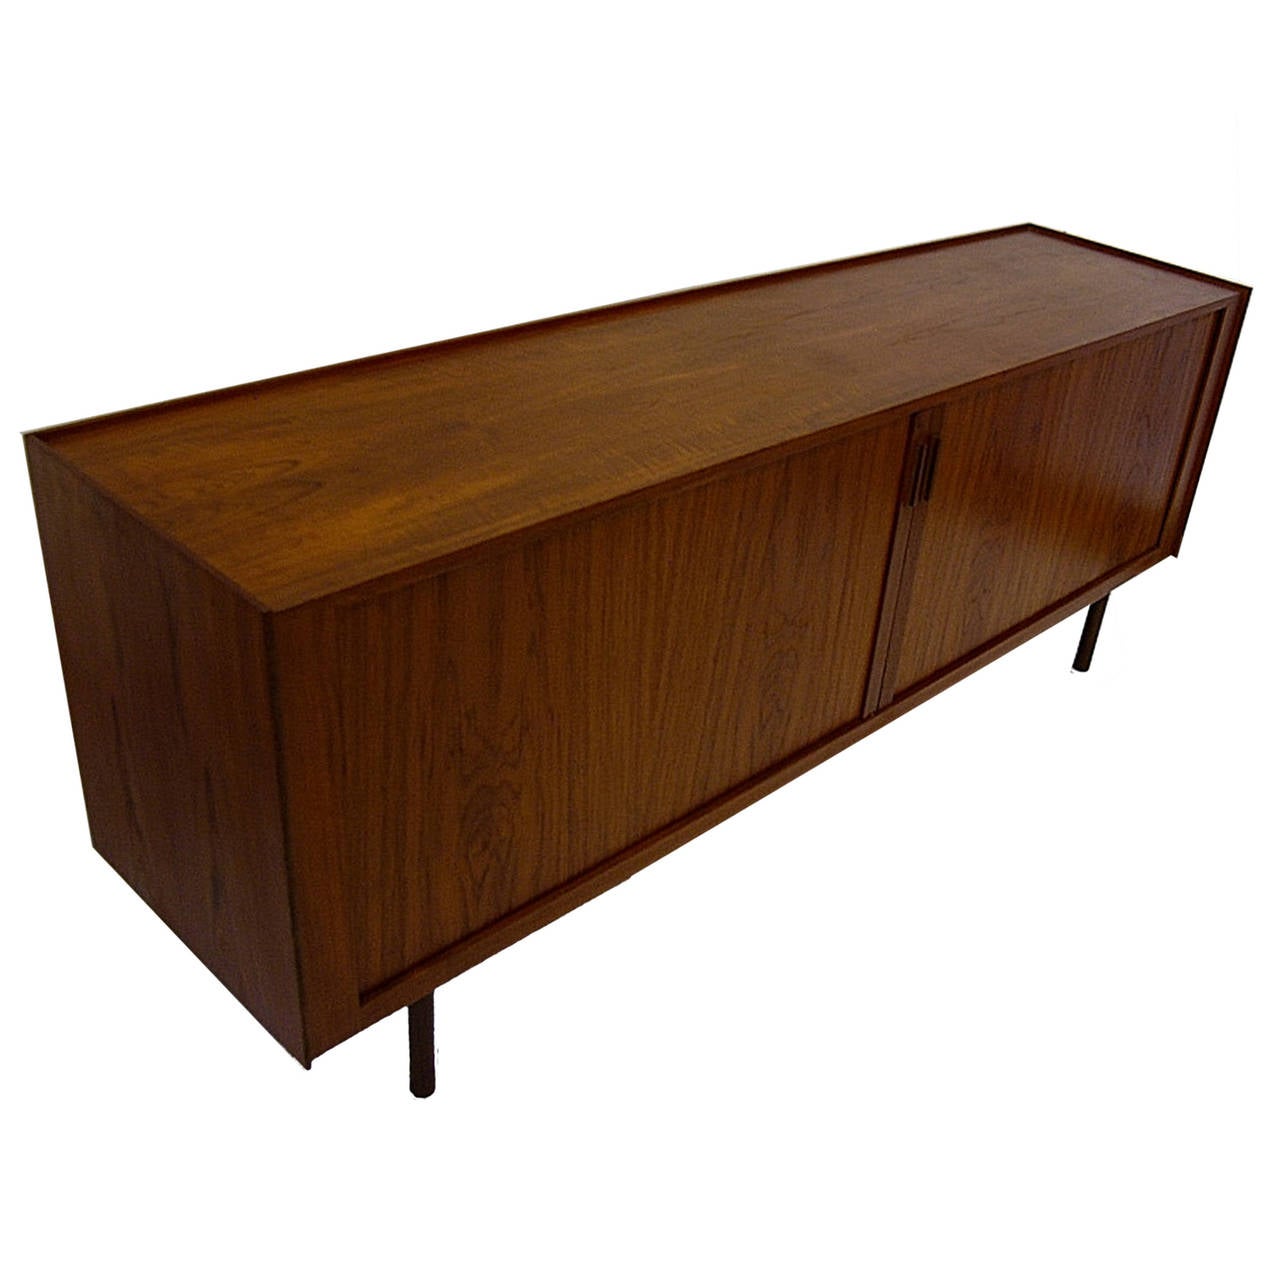 Long and stunning teak Danish credenza. Beautiful subtle tambour doors open to reveal a lovely and functional interior.